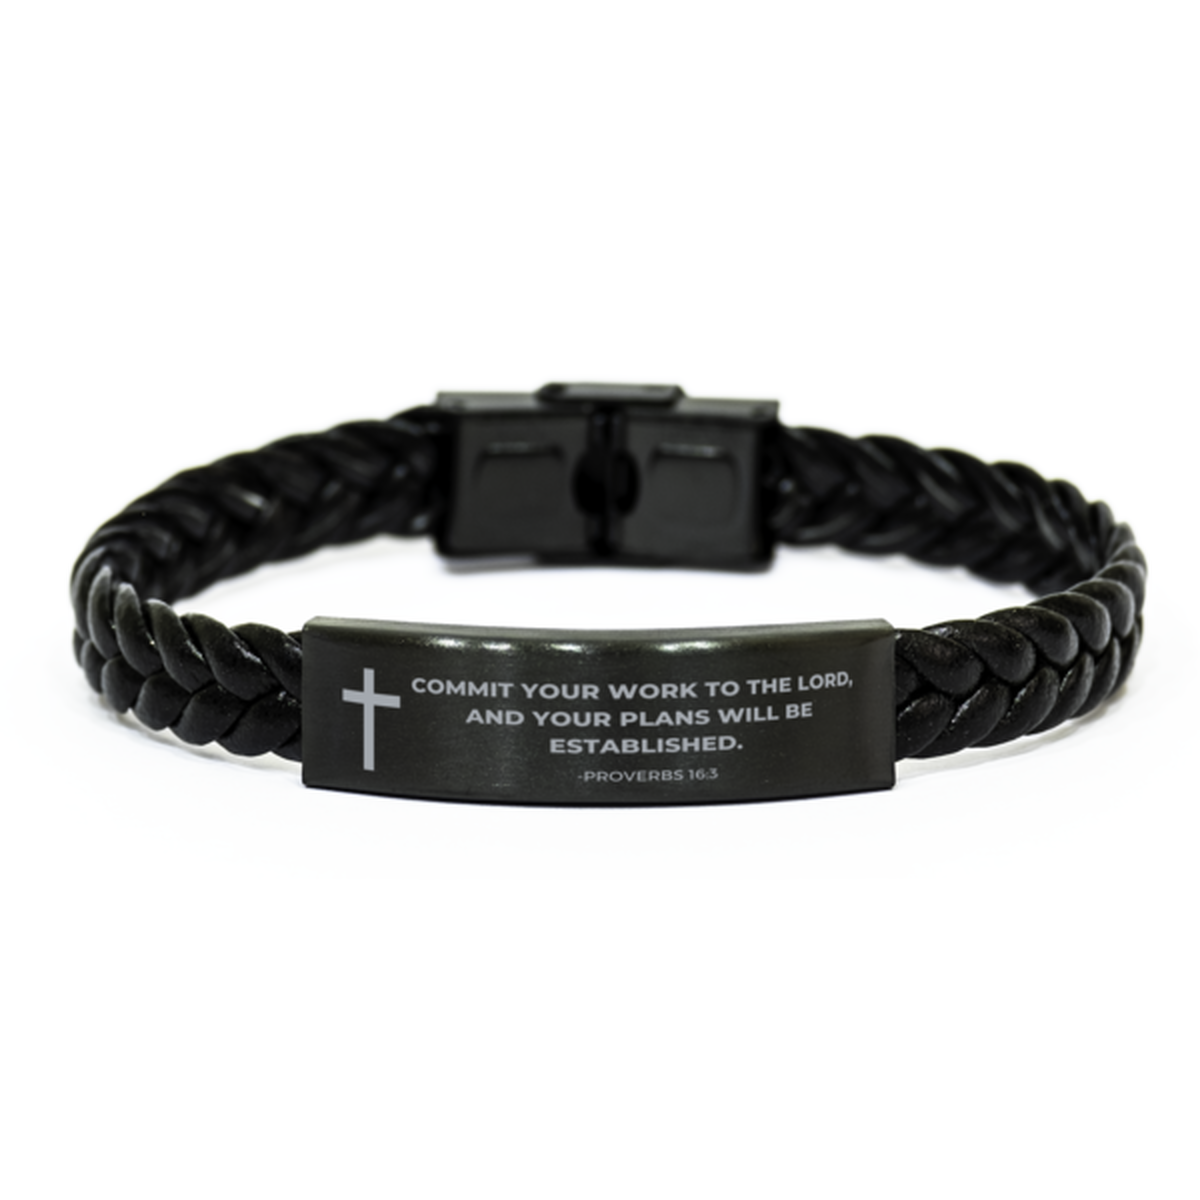 Baptism Gifts For Teenage Boys Girls, Christian Bible Verse Braided Leather Bracelet, Commit your work to the Lord, Catholic Confirmation Gifts for Son, Godson, Grandson, Nephew